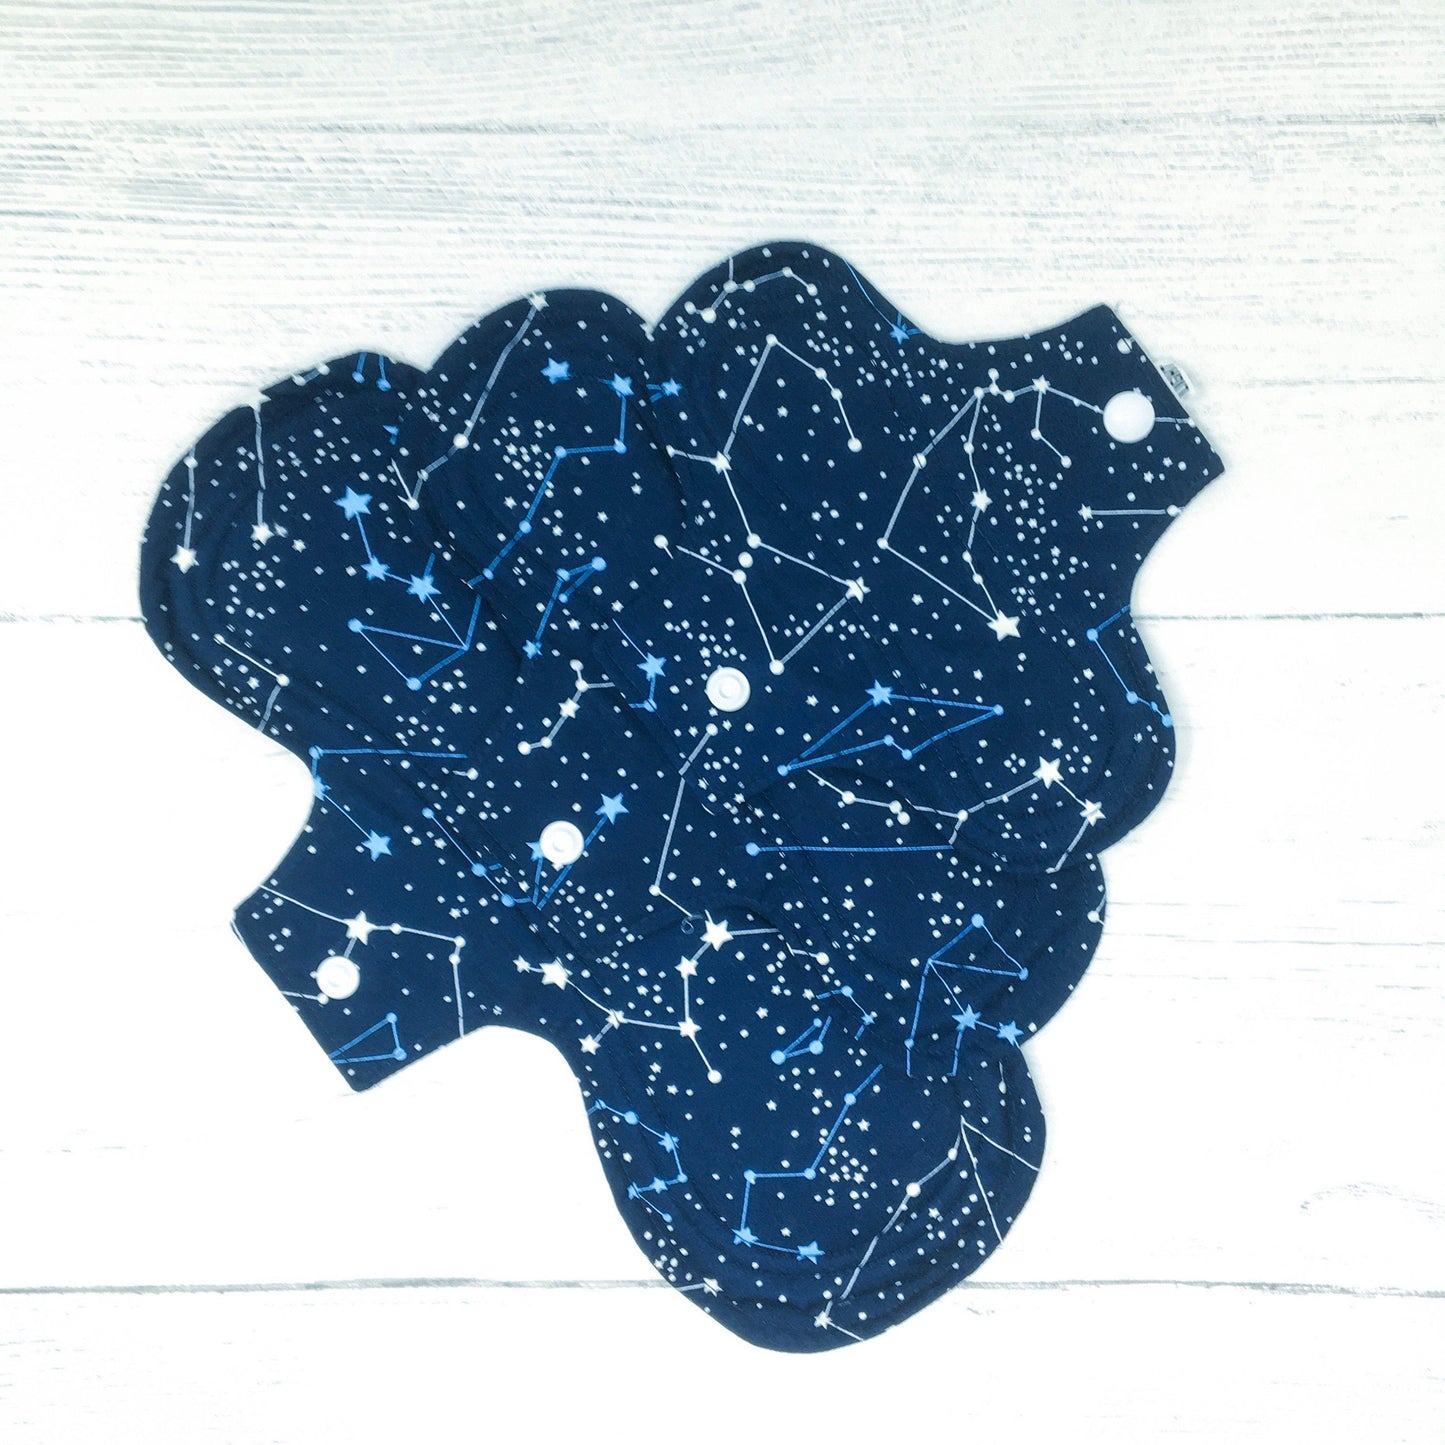 Trial Pack of Reusable Menstrual Pads - Navy Stars